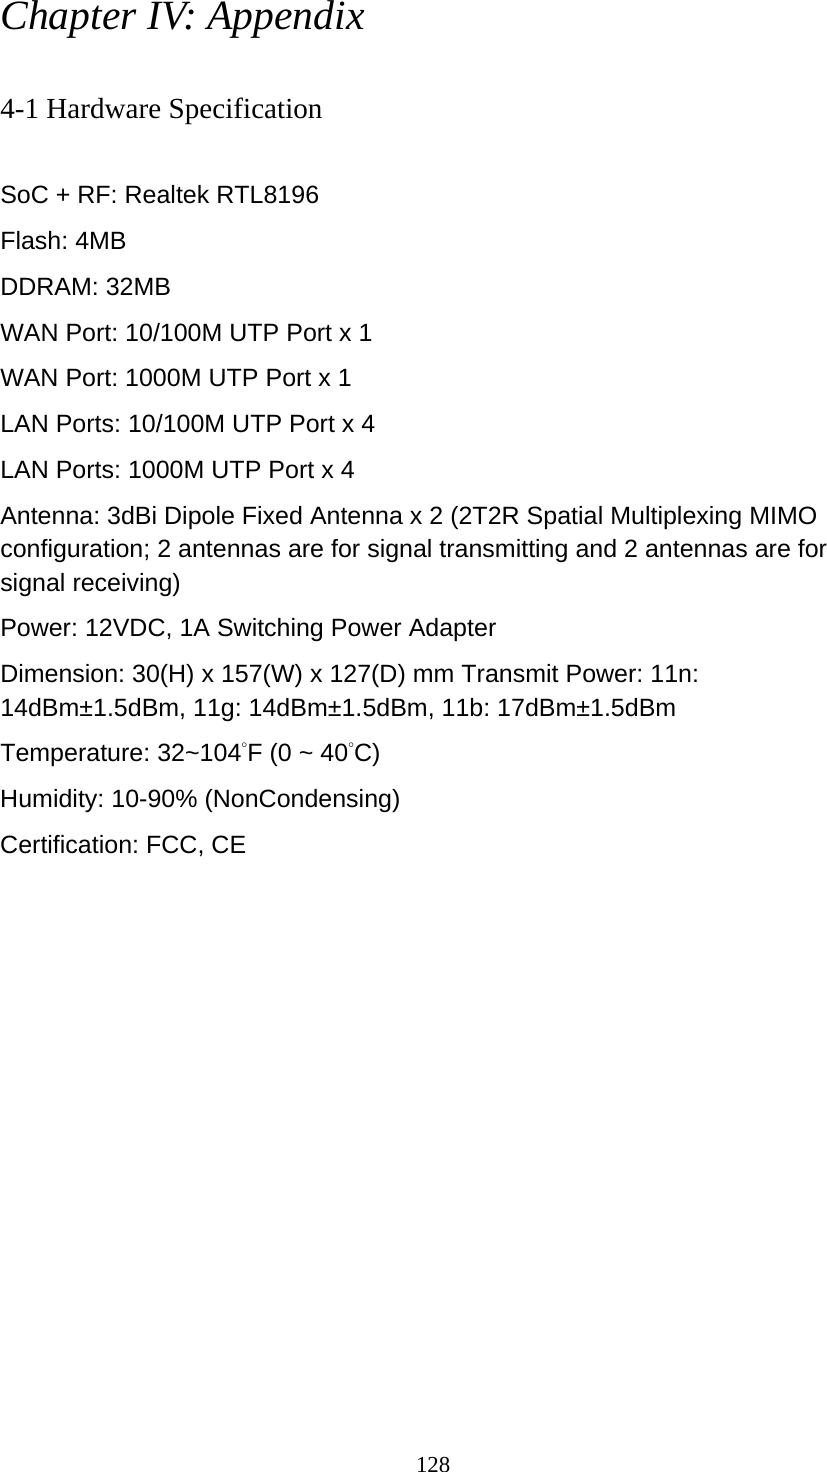 128 Chapter IV: Appendix  4-1 Hardware Specification  SoC + RF: Realtek RTL8196 Flash: 4MB   DDRAM: 32MB WAN Port: 10/100M UTP Port x 1 WAN Port: 1000M UTP Port x 1 LAN Ports: 10/100M UTP Port x 4 LAN Ports: 1000M UTP Port x 4 Antenna: 3dBi Dipole Fixed Antenna x 2 (2T2R Spatial Multiplexing MIMO configuration; 2 antennas are for signal transmitting and 2 antennas are for signal receiving) Power: 12VDC, 1A Switching Power Adapter Dimension: 30(H) x 157(W) x 127(D) mm Transmit Power: 11n: 14dBm±1.5dBm, 11g: 14dBm±1.5dBm, 11b: 17dBm±1.5dBm   Temperature: 32~104°F (0 ~ 40°C) Humidity: 10-90% (NonCondensing) Certification: FCC, CE 